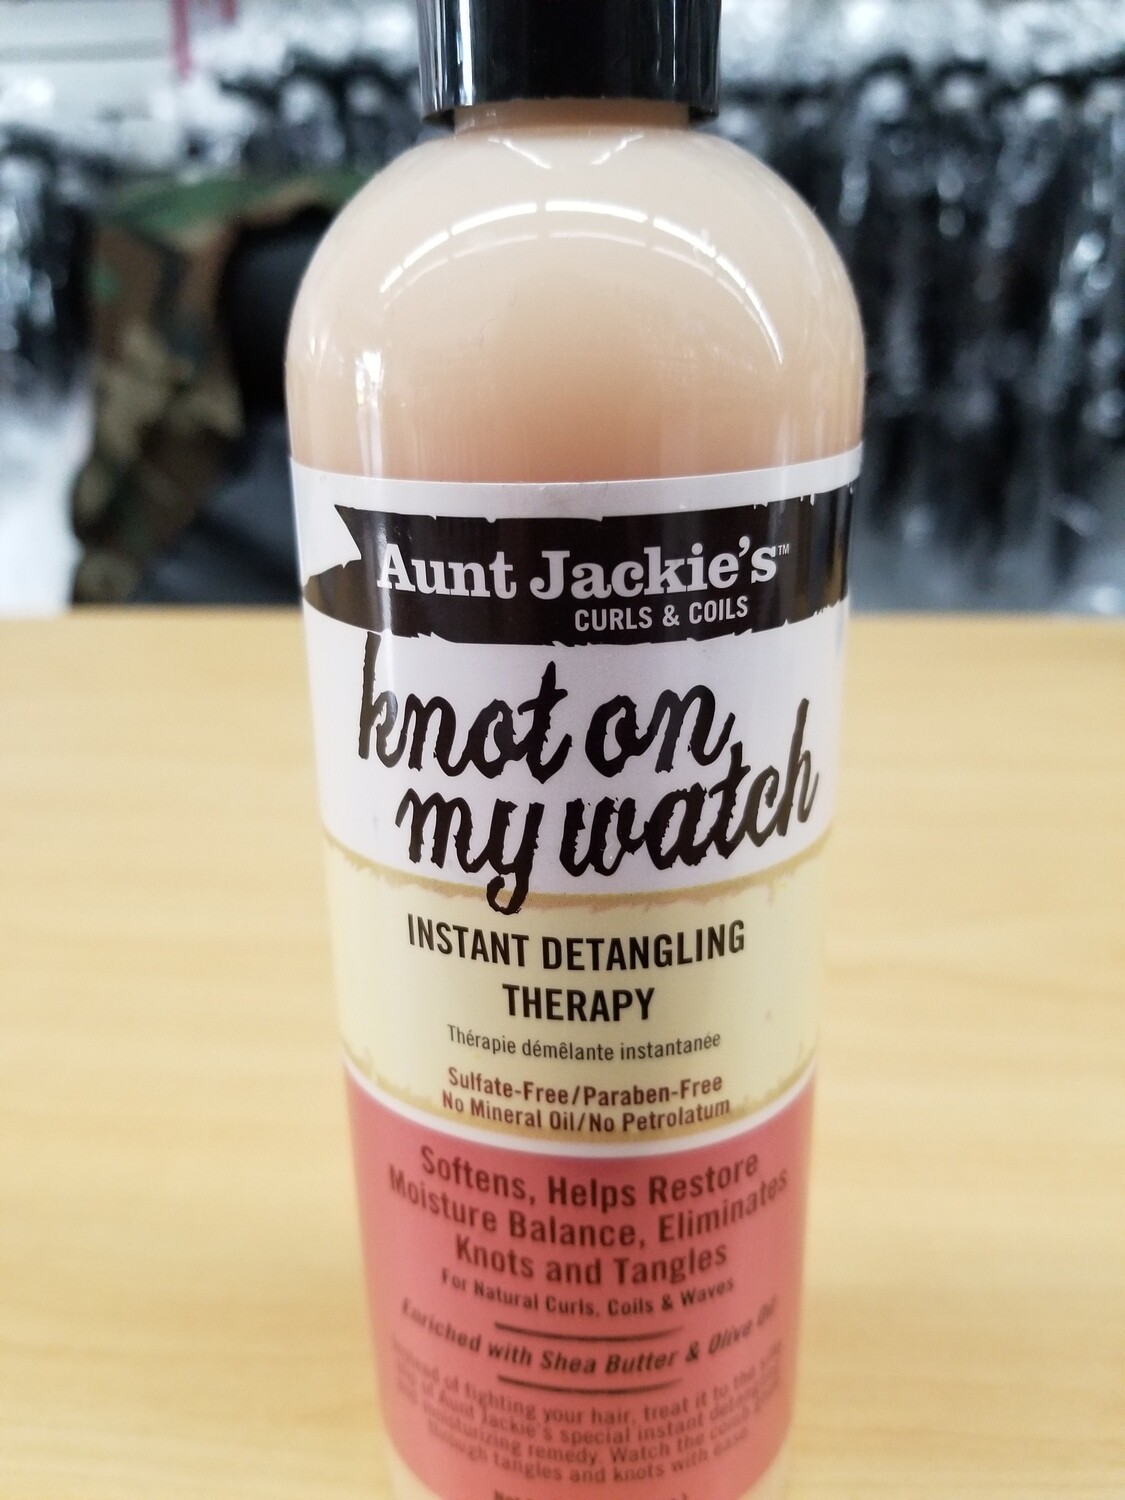 Aunt Jackie's Instant Detangling Therapy